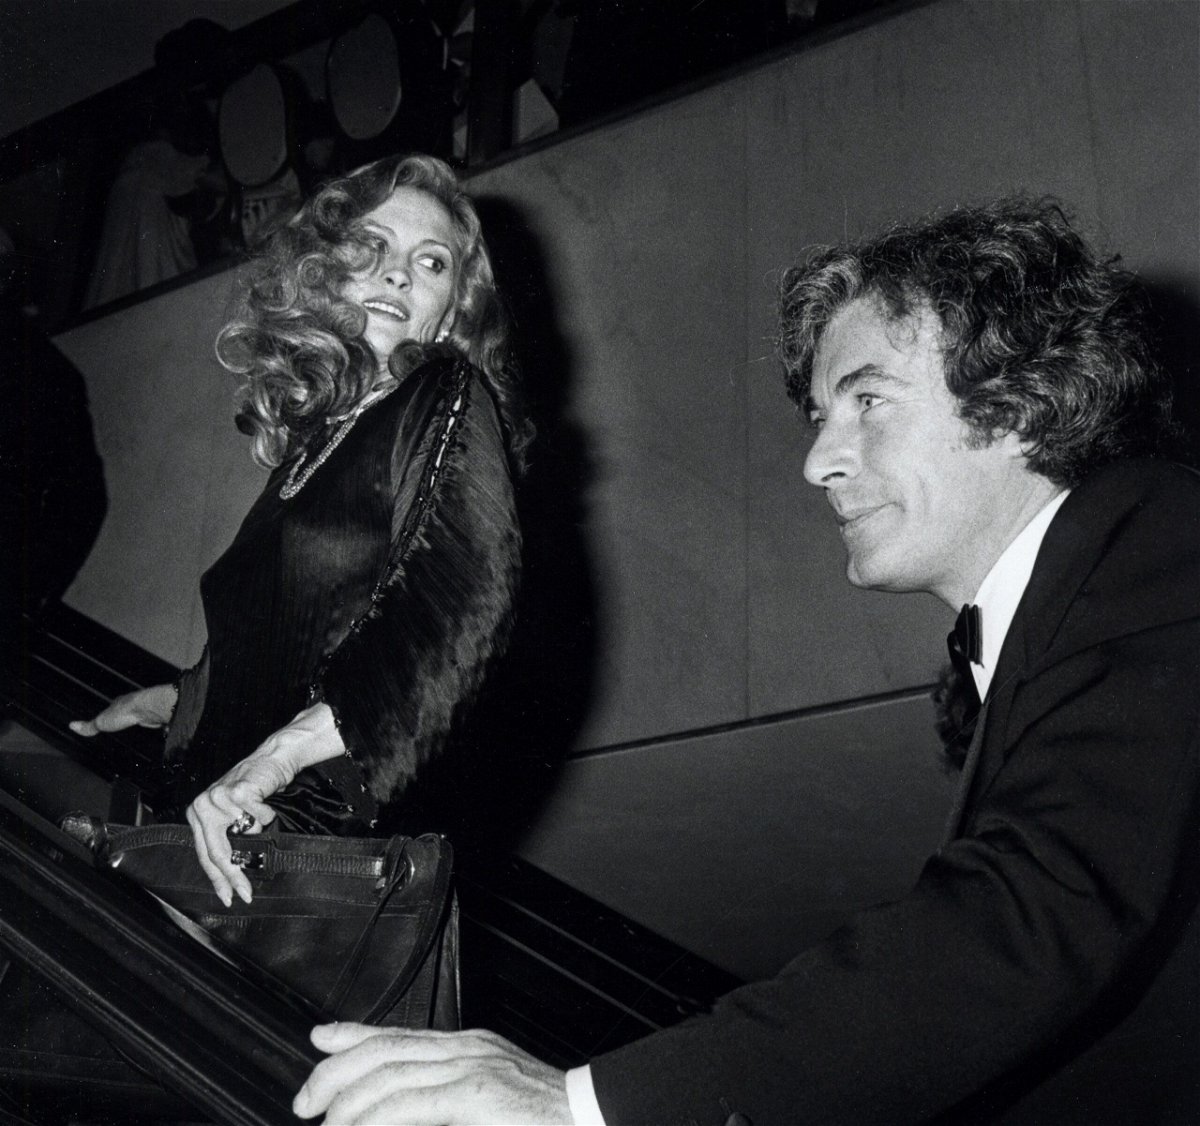 <i>Ron Galella/Ron Galella Collection/Getty Images</i><br/>Faye Dunaway and Terry O'Neill in 1980 at the 34th Tony Awards party in New York.